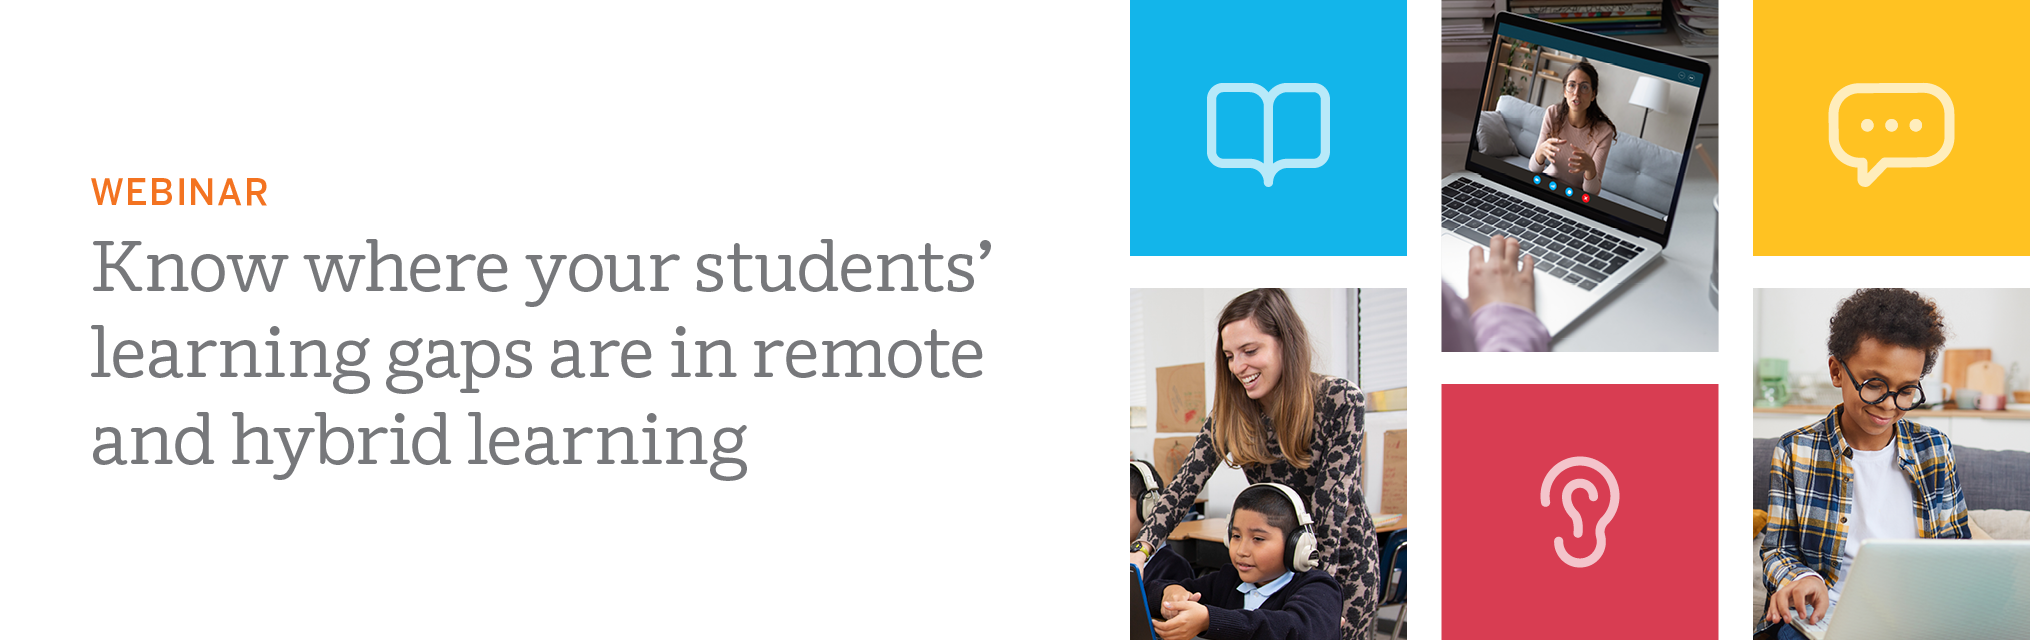 Webinar: Know where your students' learning gaps are in remote and hybrid learning